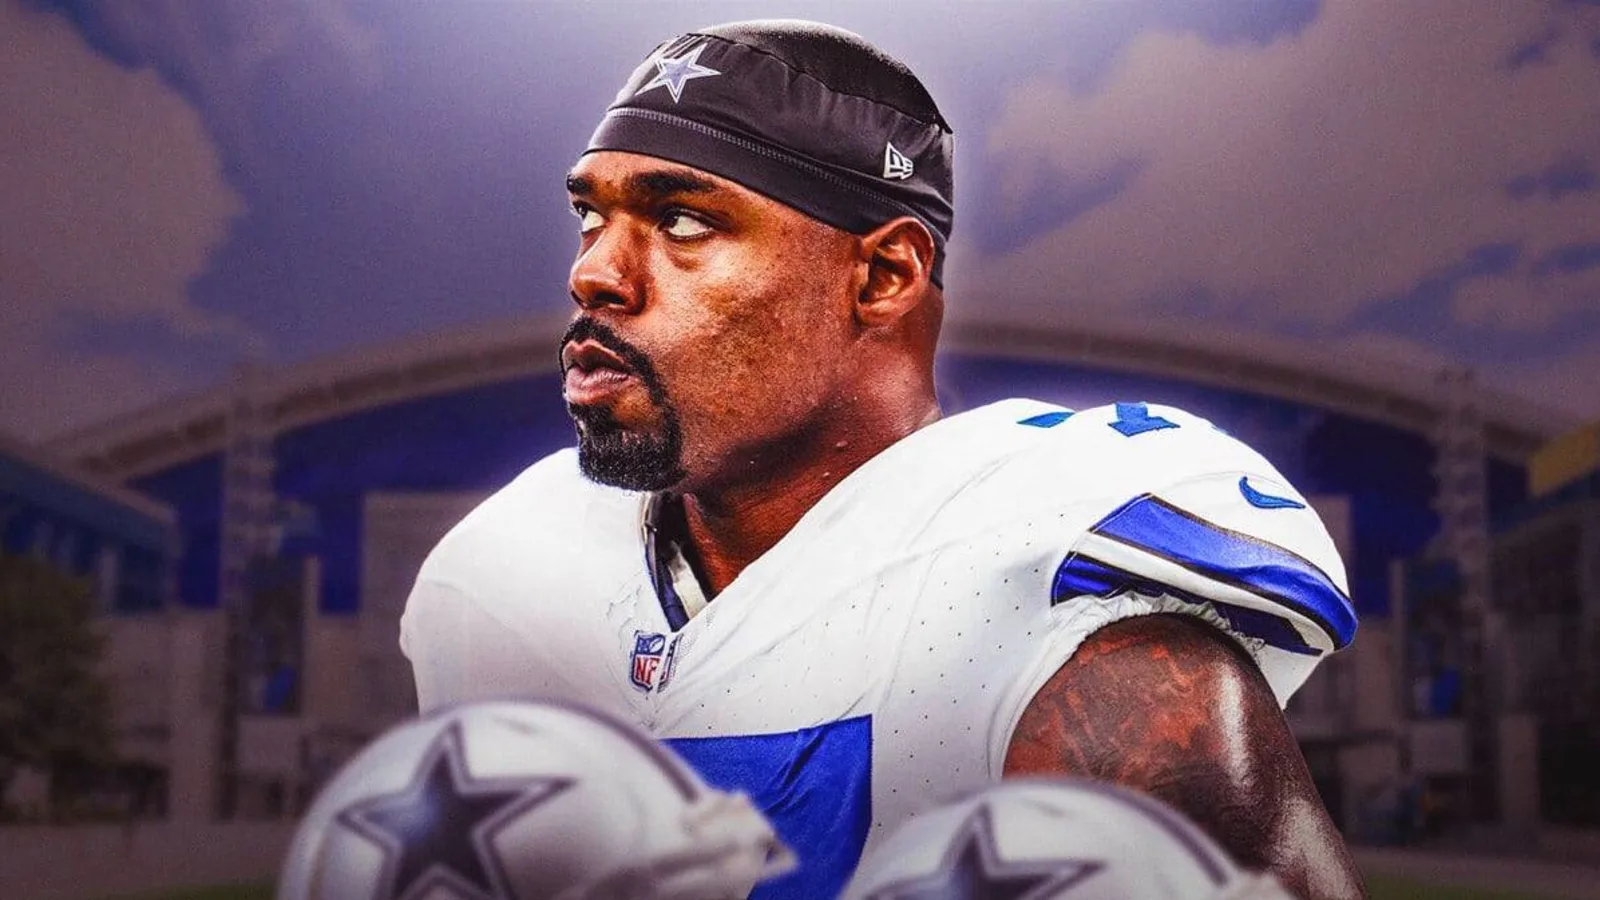 The Offseason Shuffle Why Tyron Smith is the Free Agent Linchpin for Five NFL Teams